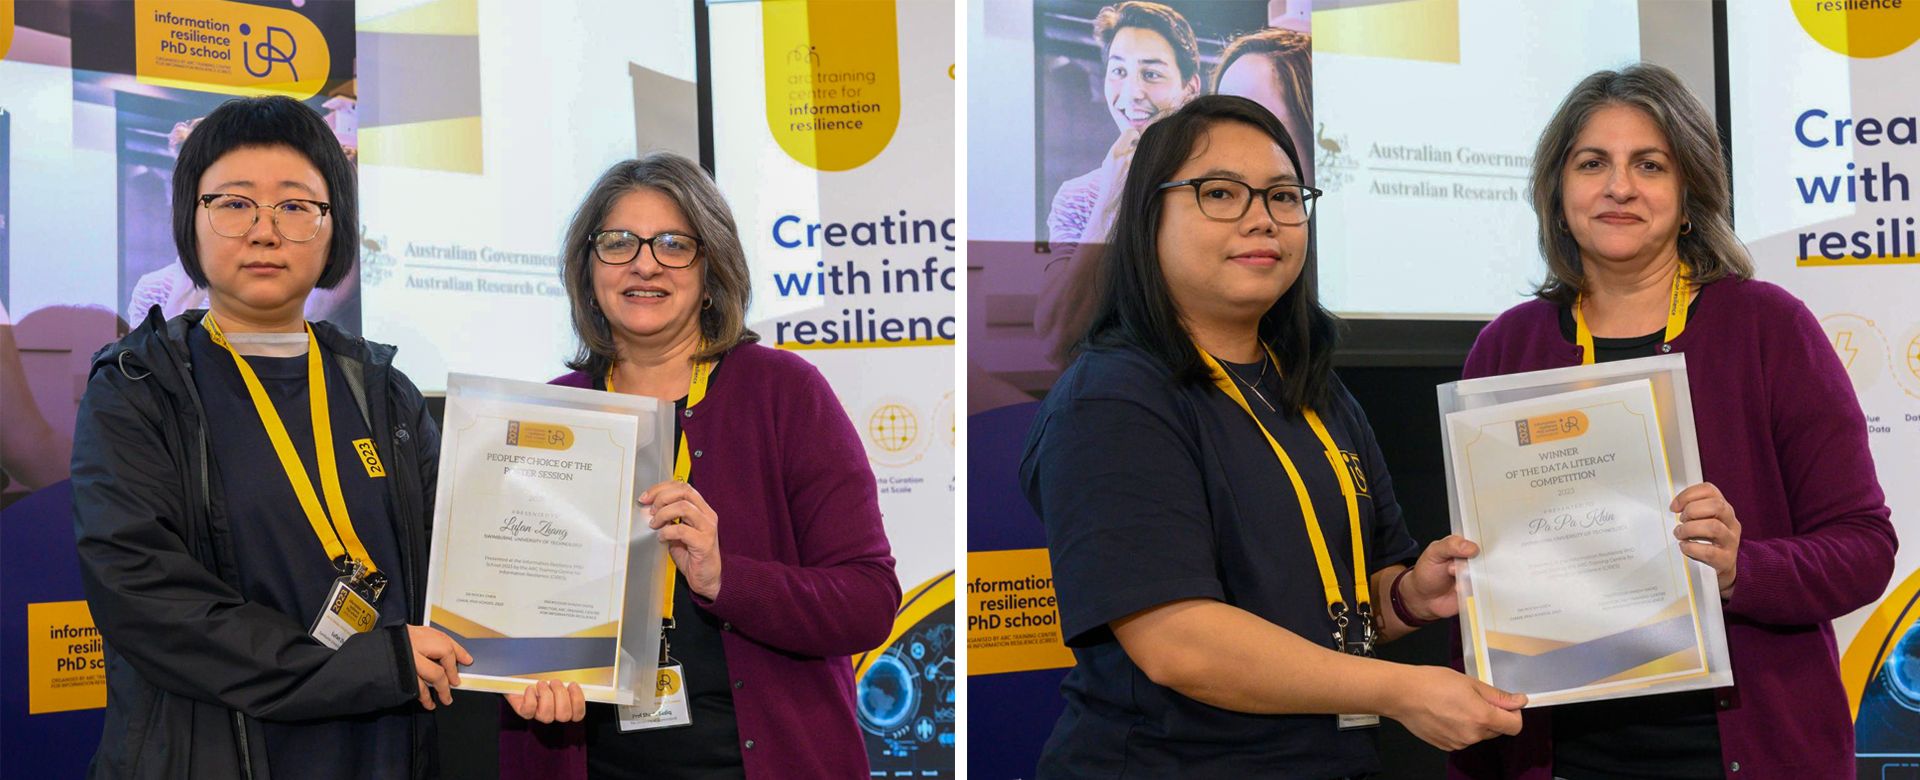 Swinburne PhD students Lufan Zhang and Pa Pa Khin have received awards at this year’s ARC Training Centre for Information Resilience (CIRES) PhD School. 